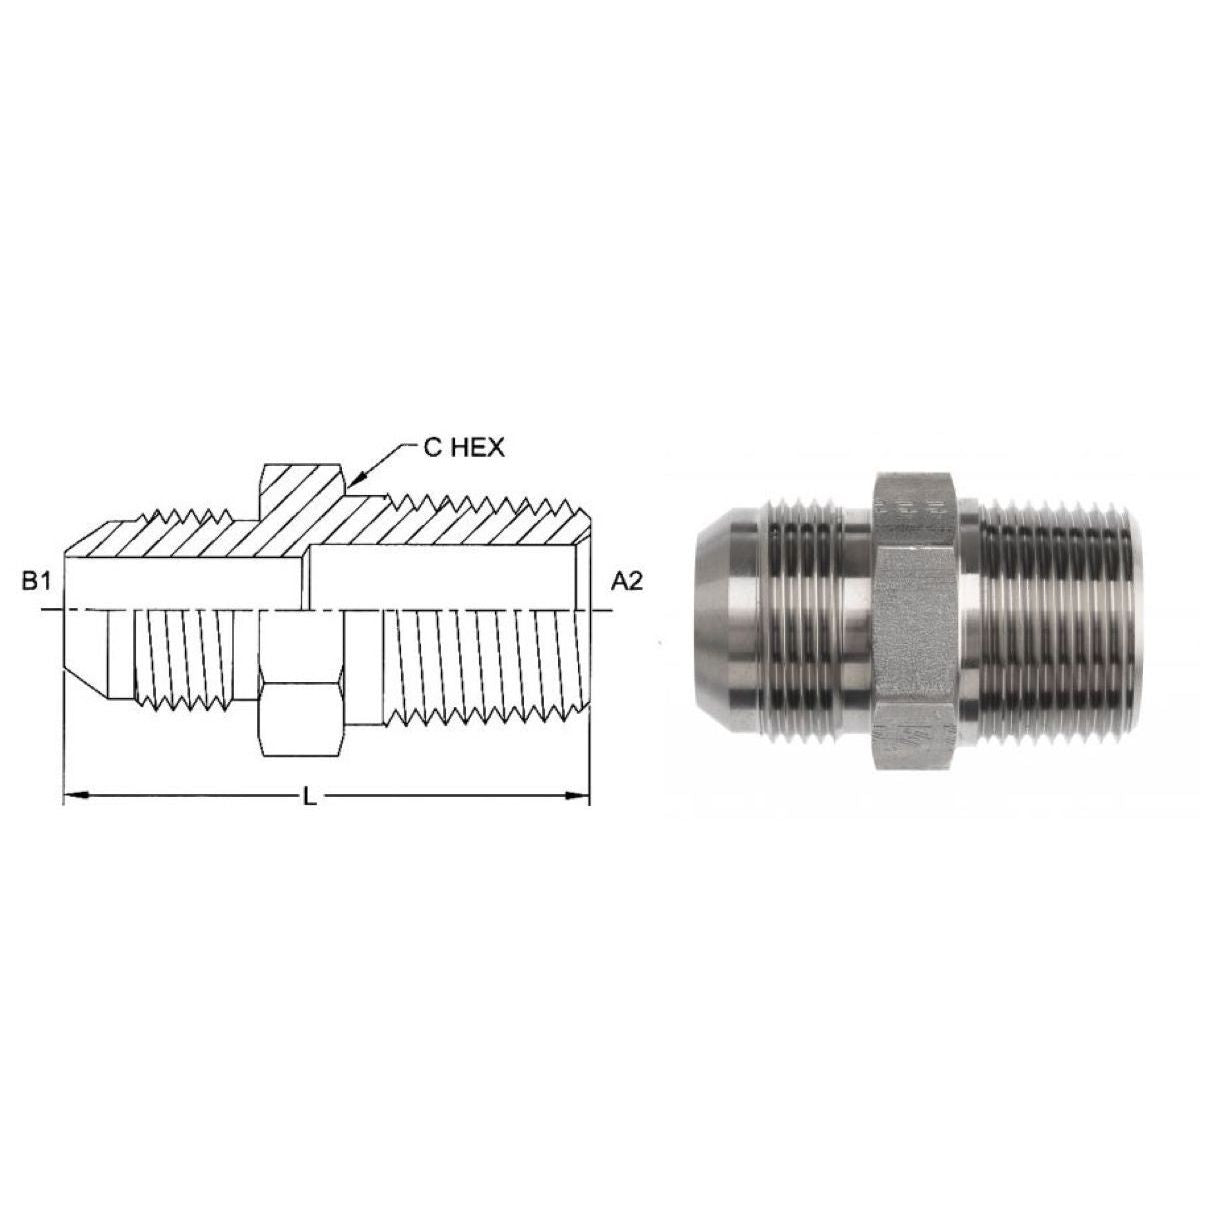 2404-12-12-SS : OneHydraulics Adapter, Straight, 0.75 (3/4") Male NPT x 0.75 (3/4") Male, Stainless Steel, 6000psi